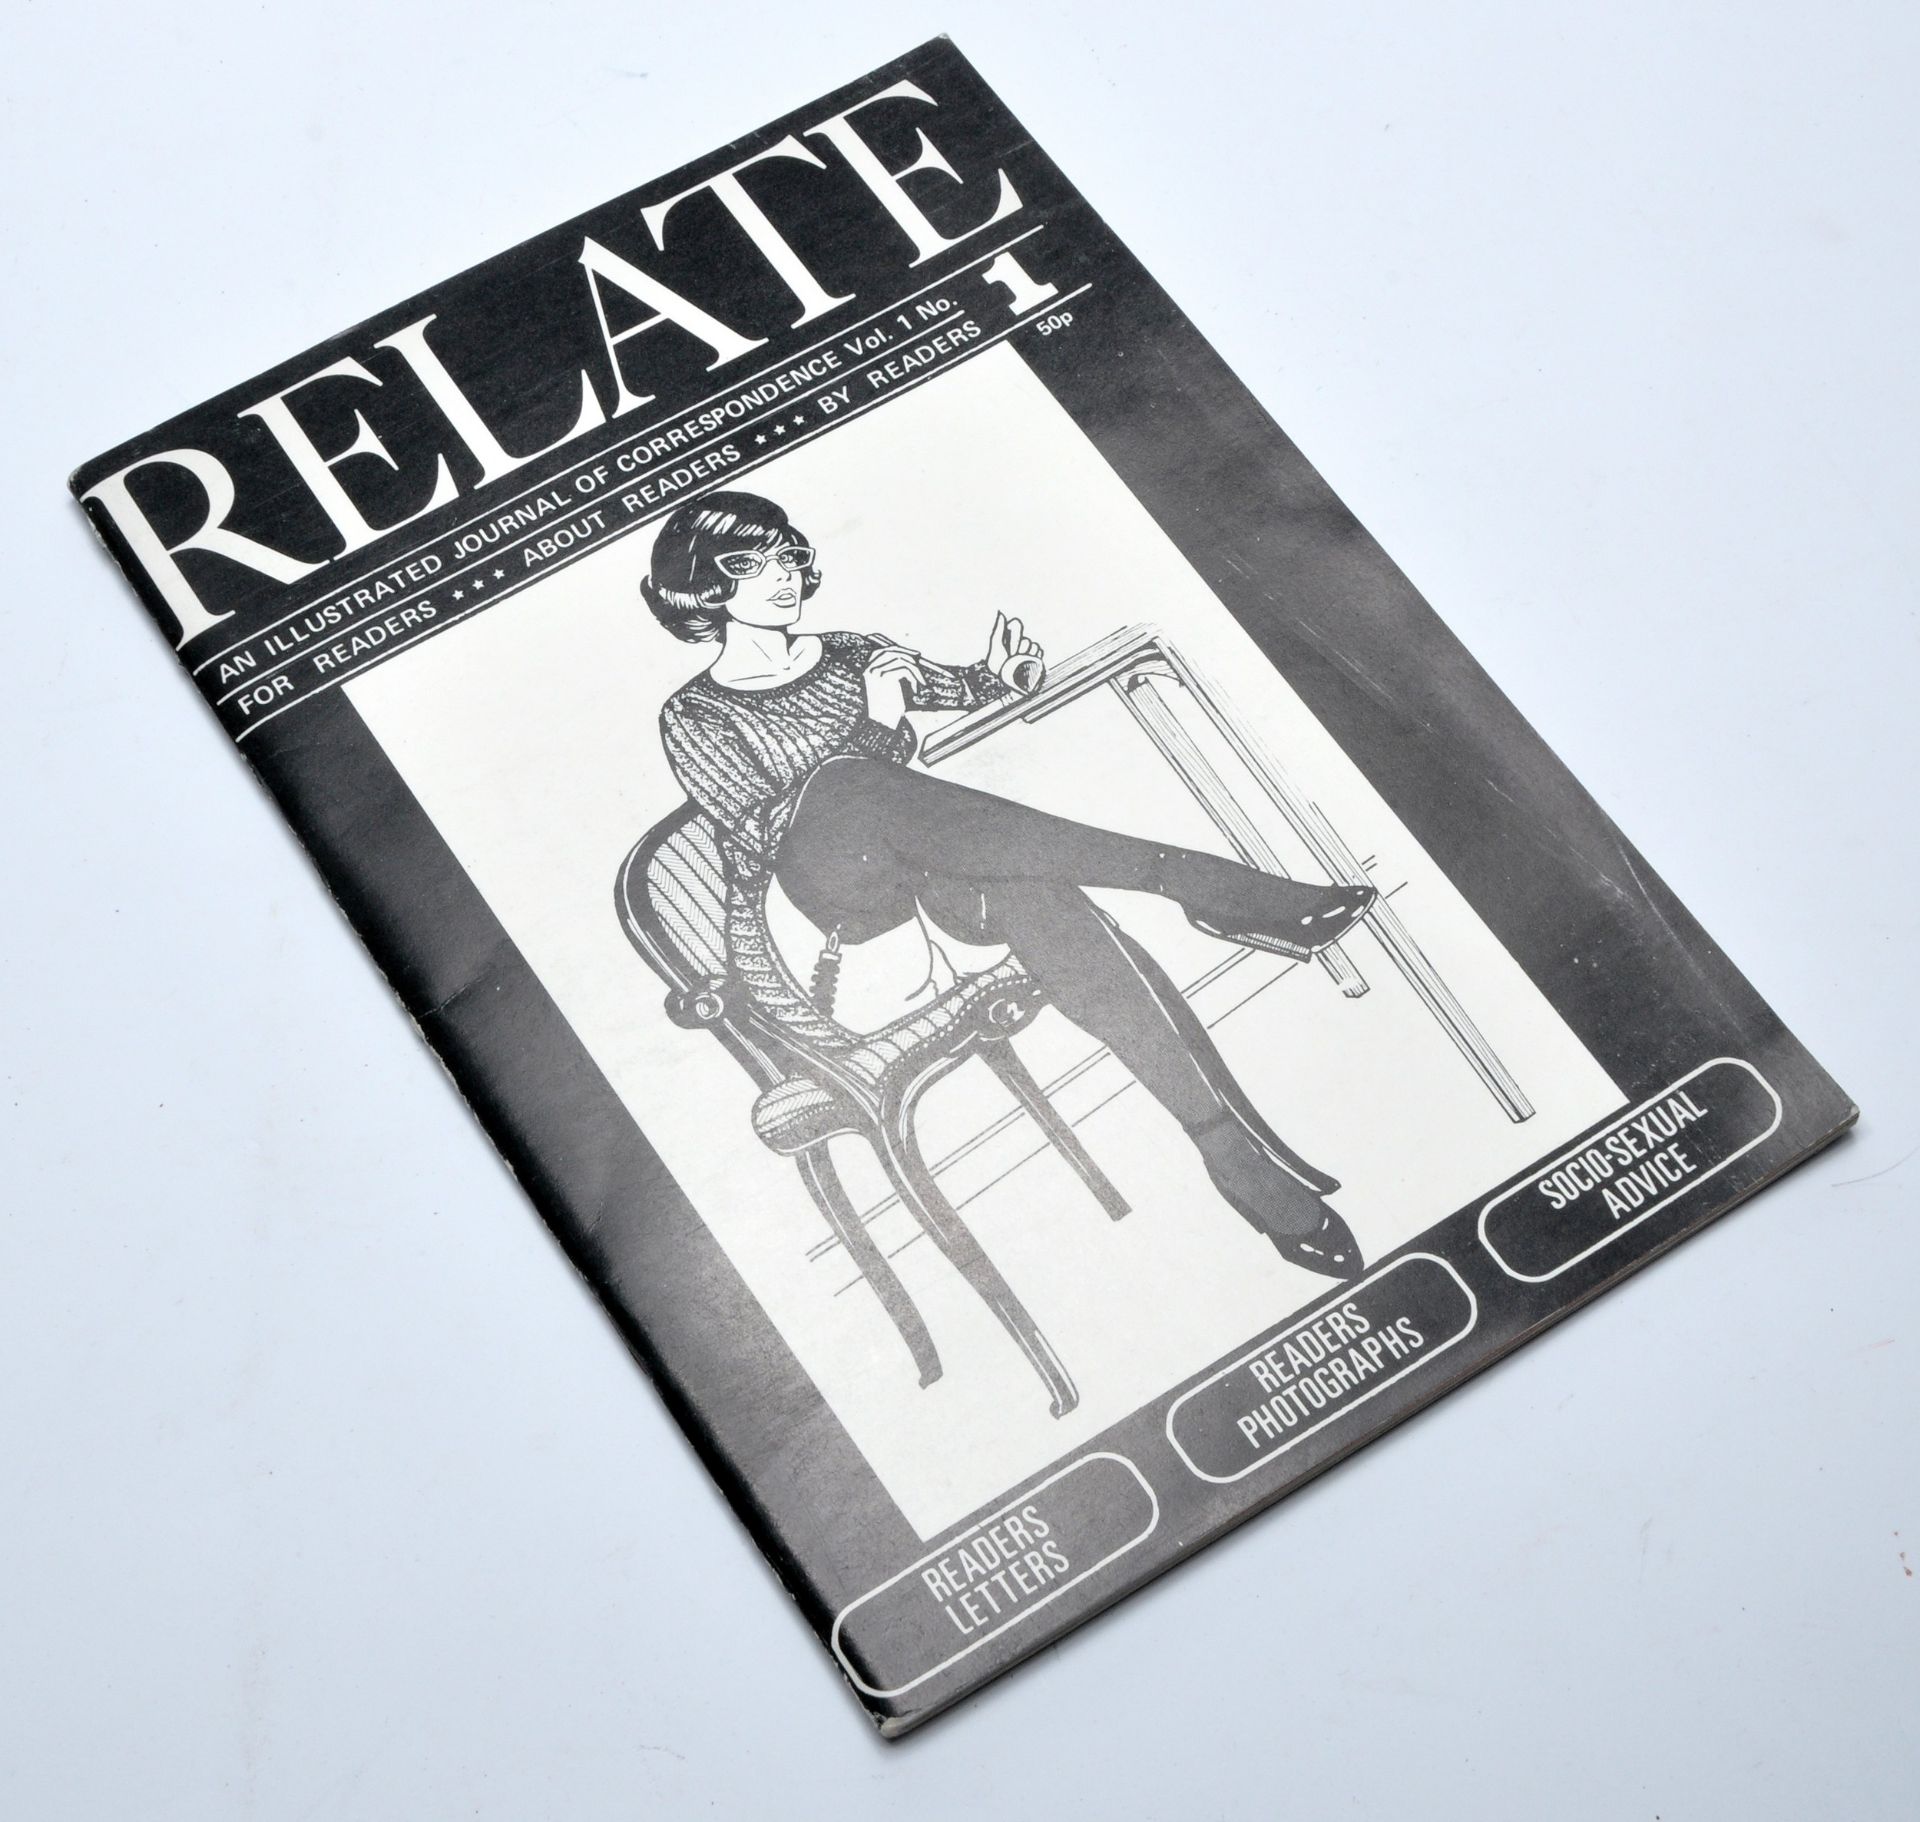 Adult Glamour Magazine / Vintage Erotica, comprising single issue of Relate, issue 1. Please note